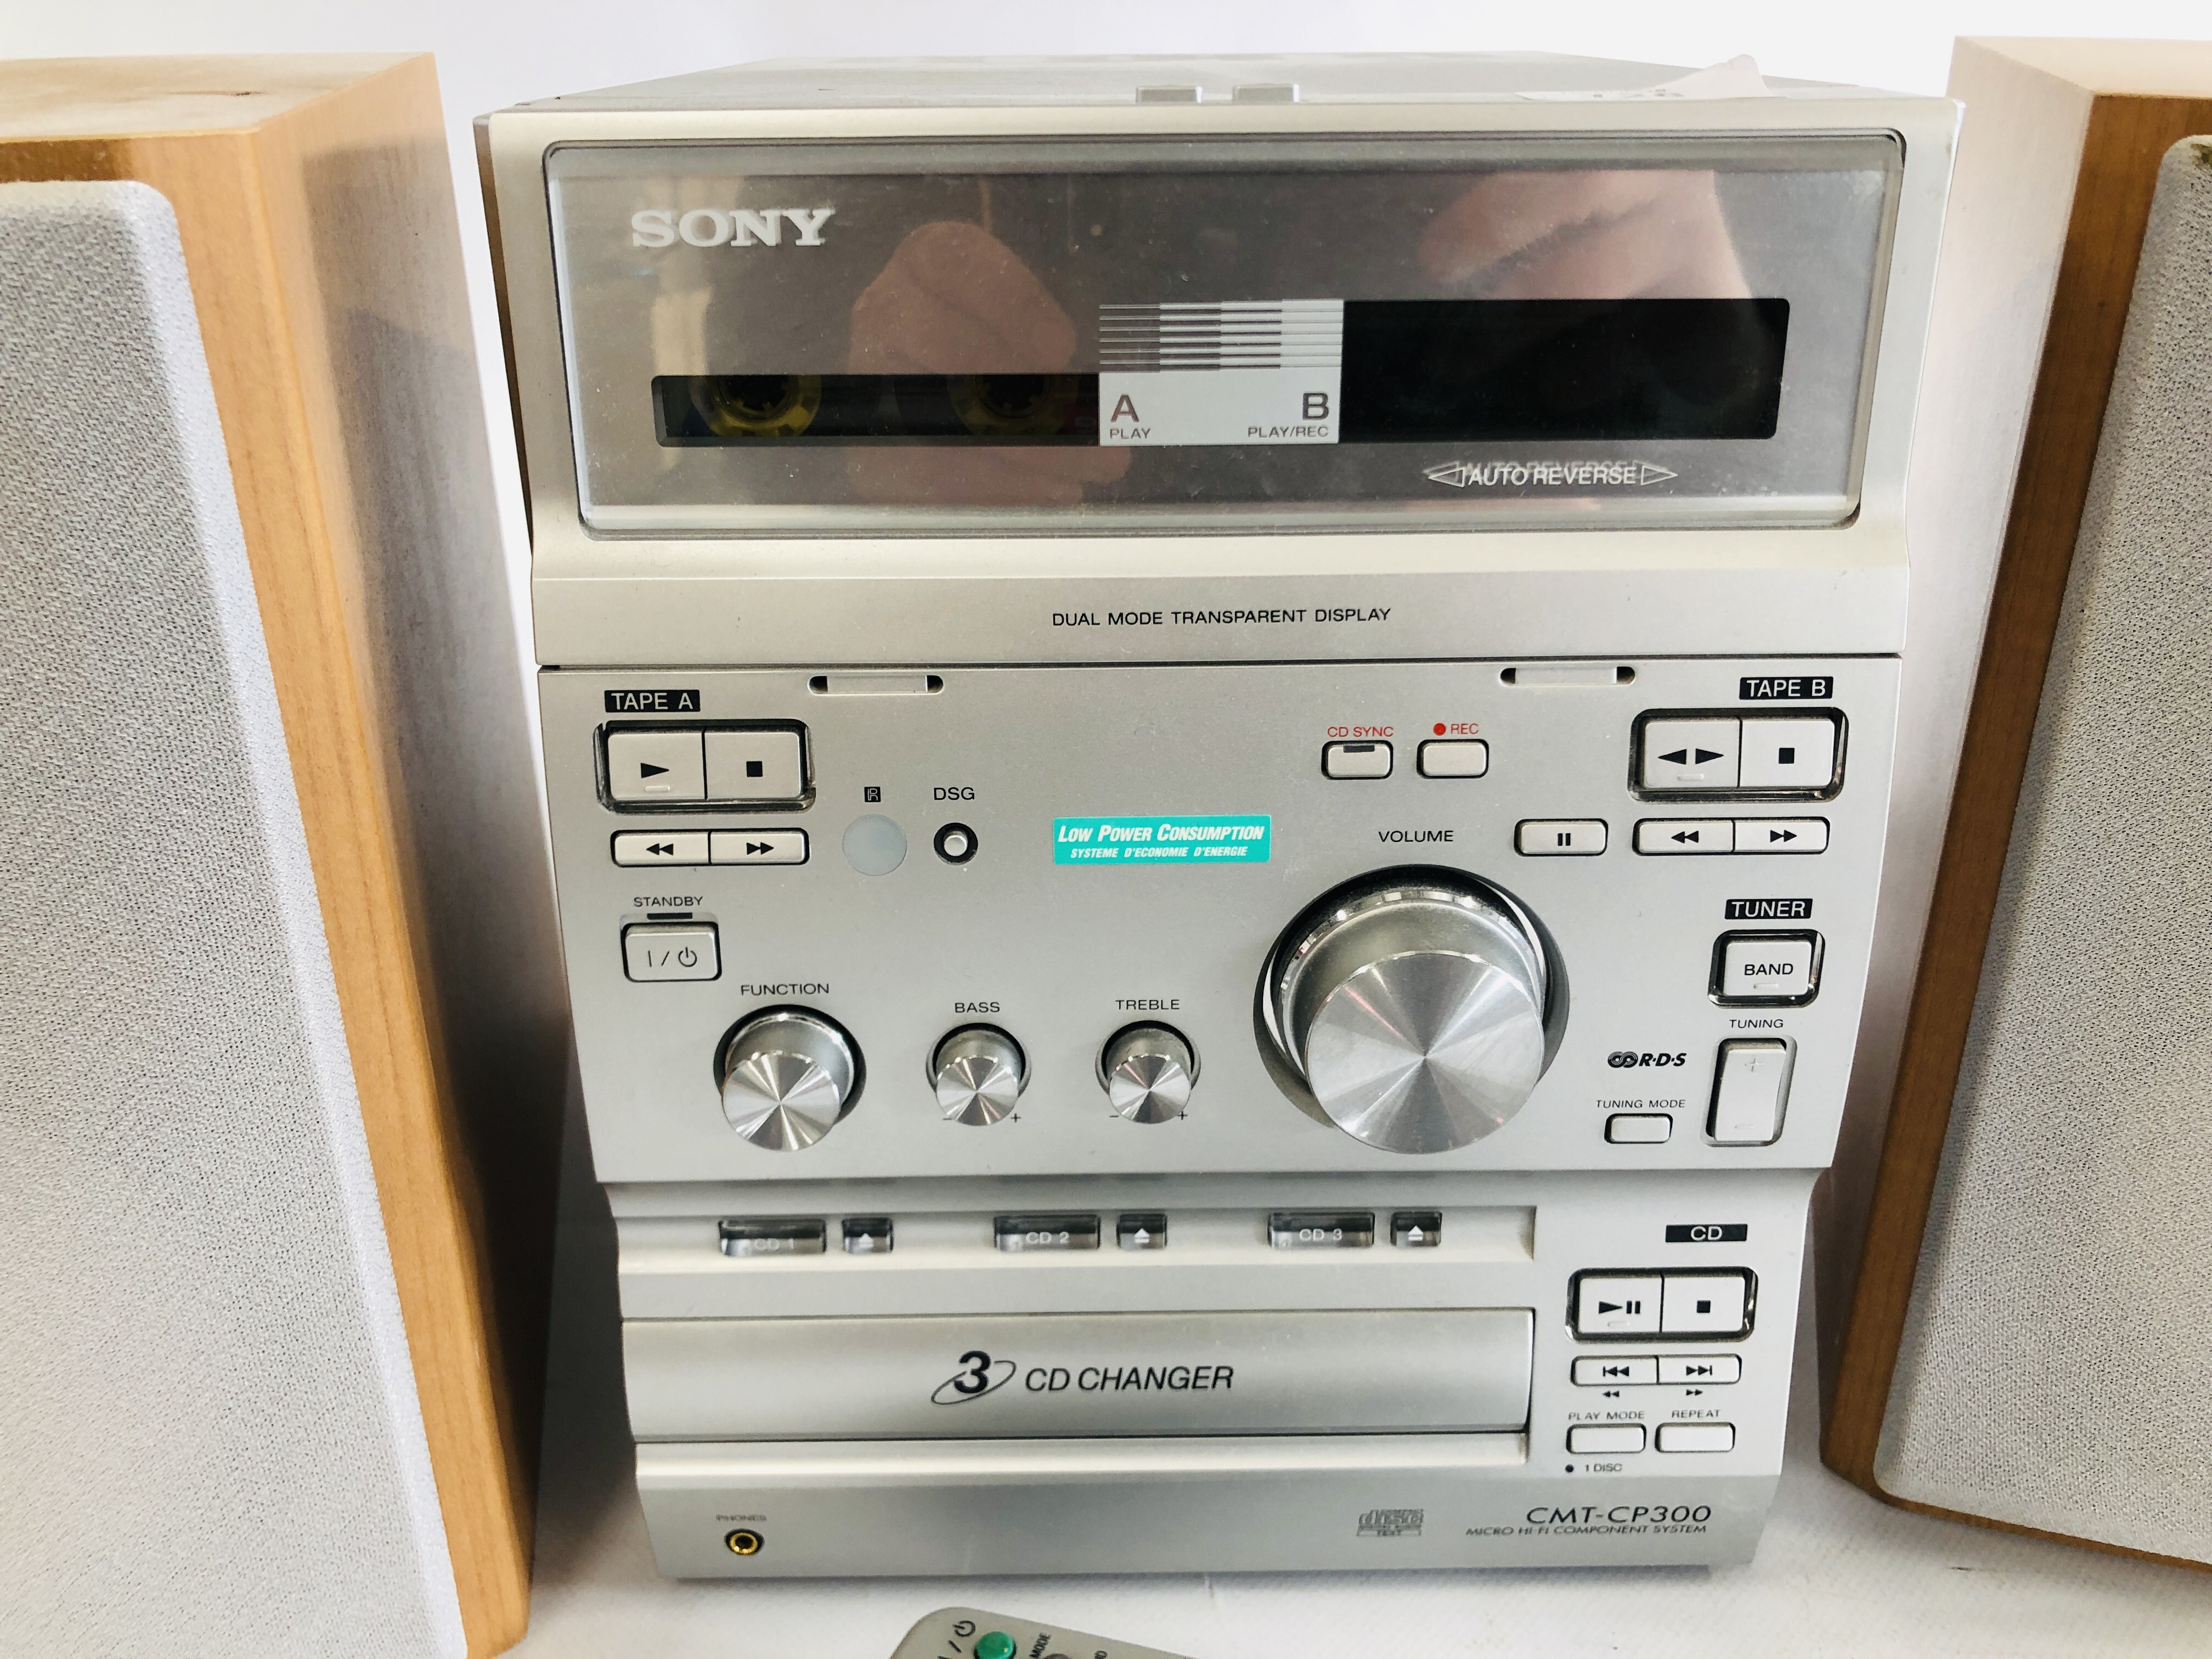 A SONY HIFI SYSTEM WITH SPEAKERS. MODEL CMT-CP300 - SOLD AS SEEN. - Image 2 of 4